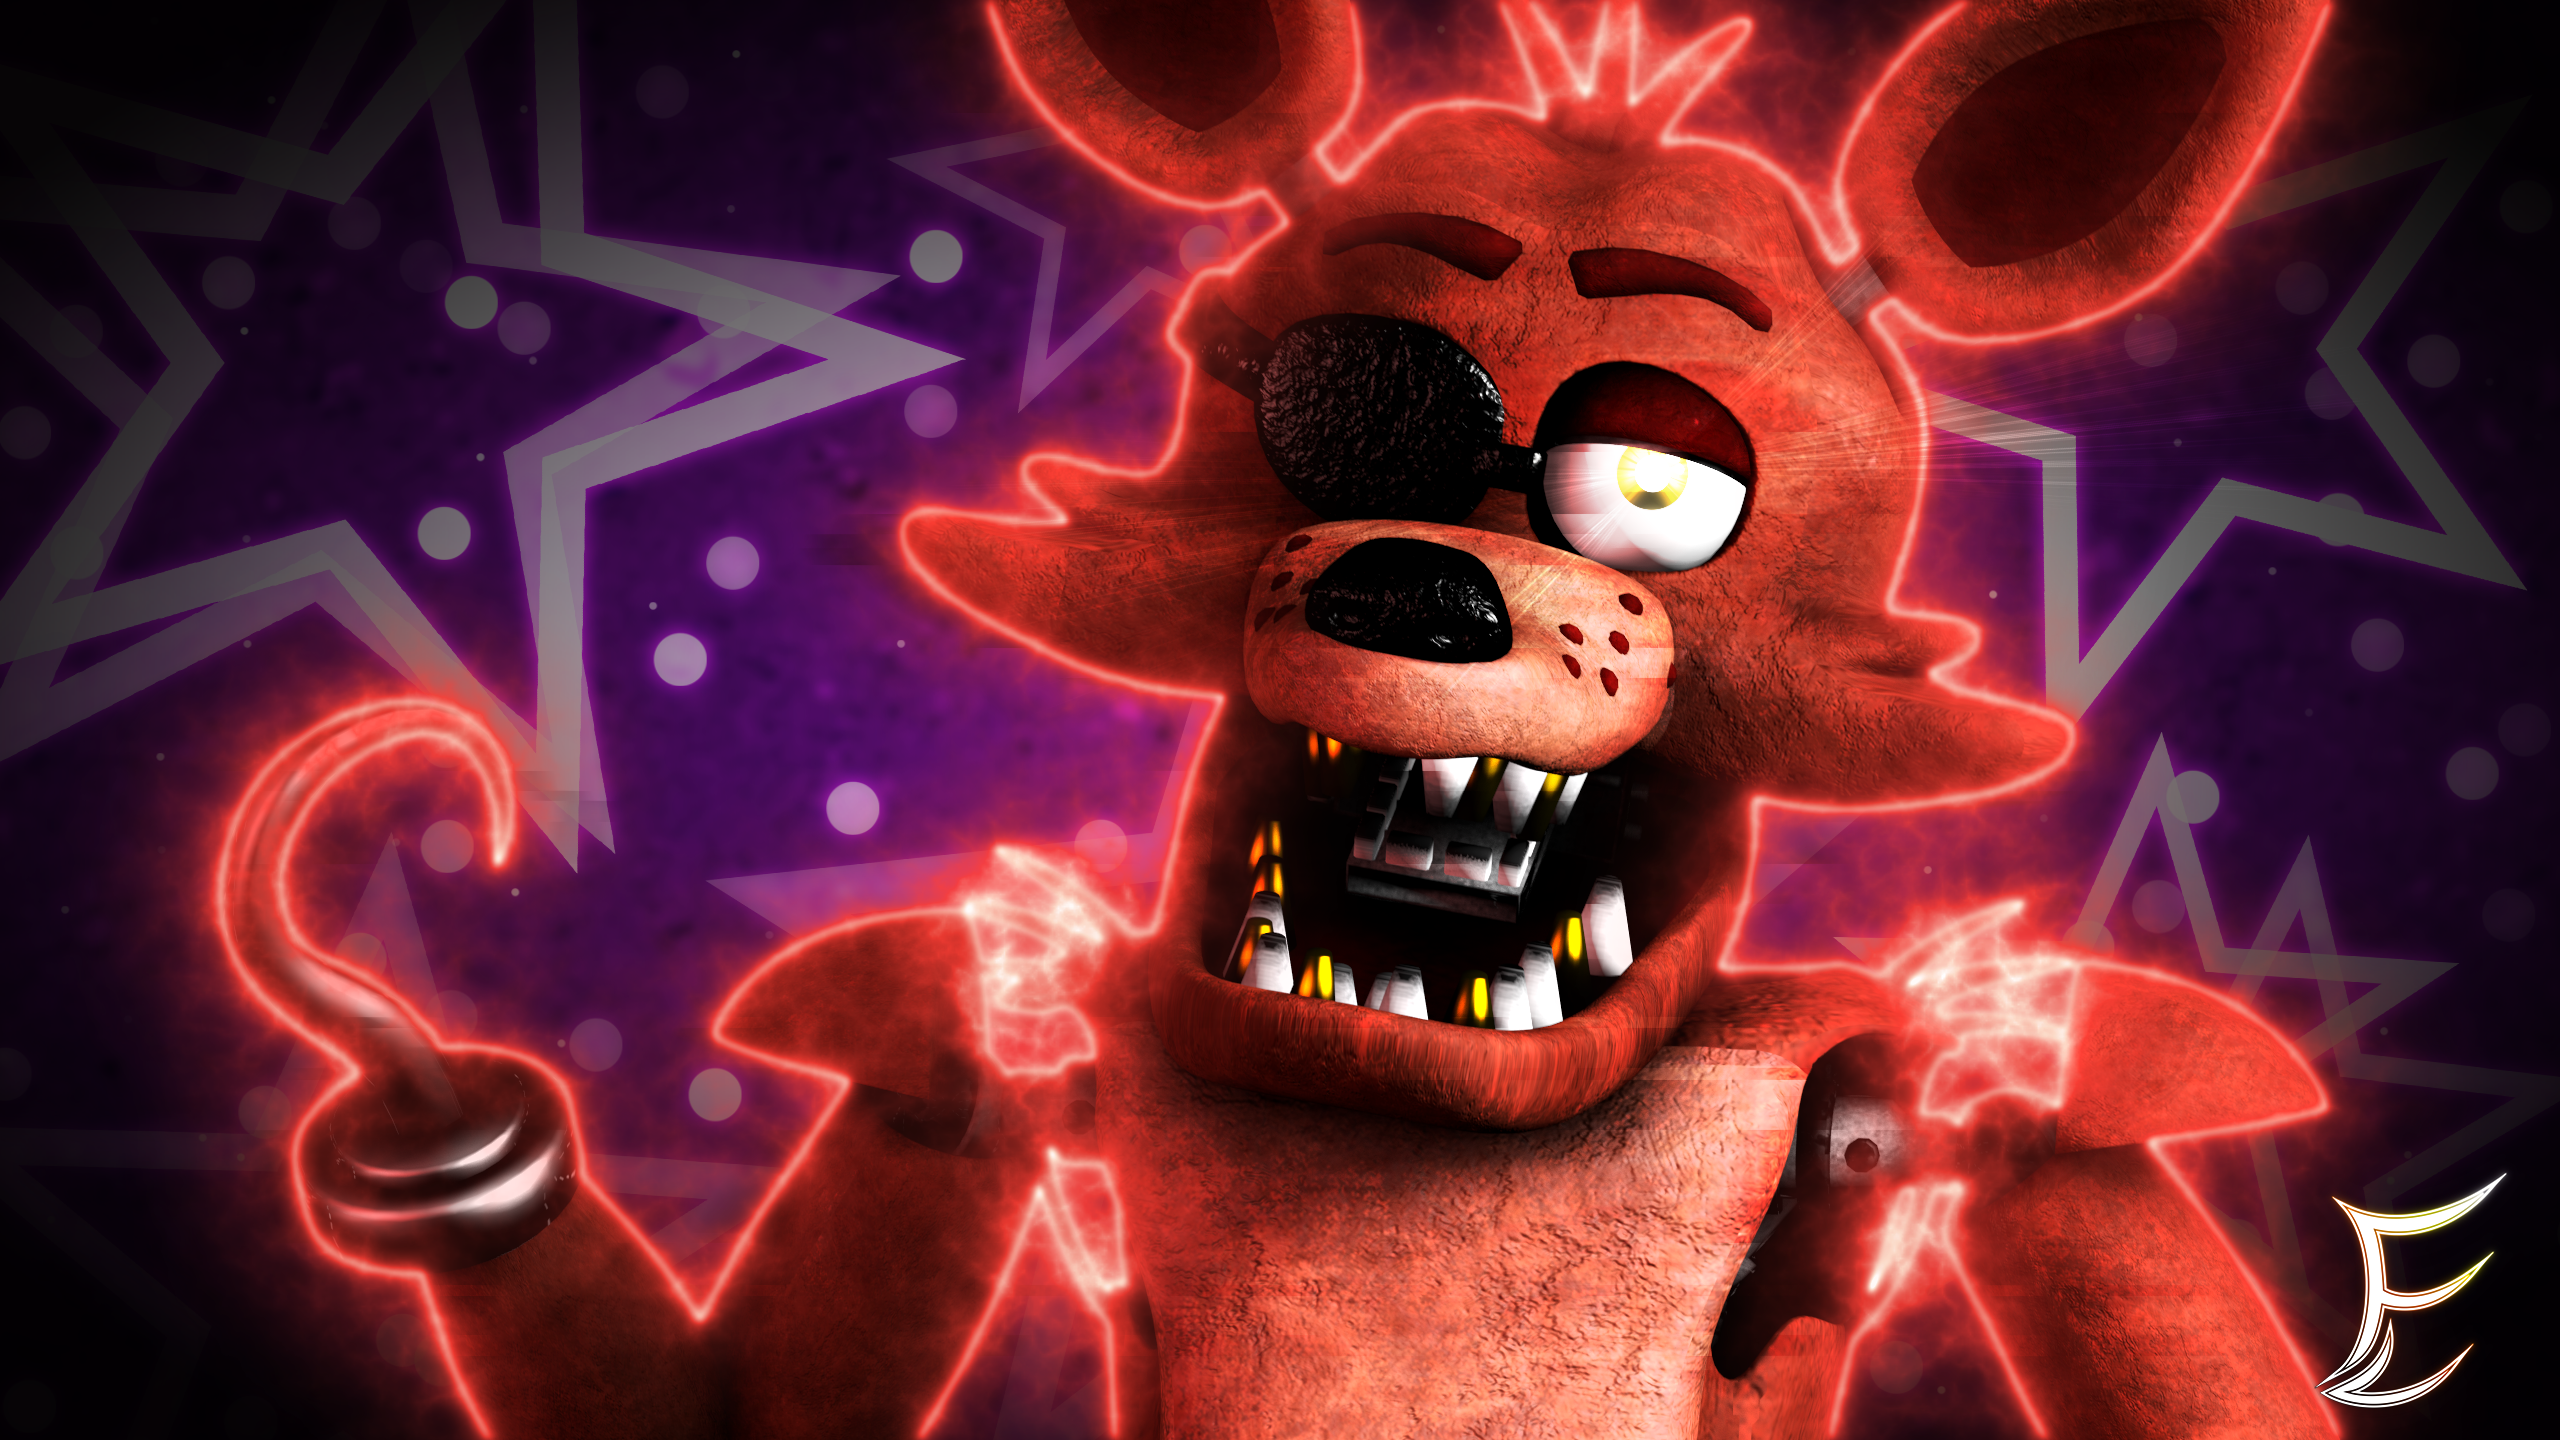 Repaired Foxy Wallpaper V2 By Flamerl13 On Deviantart